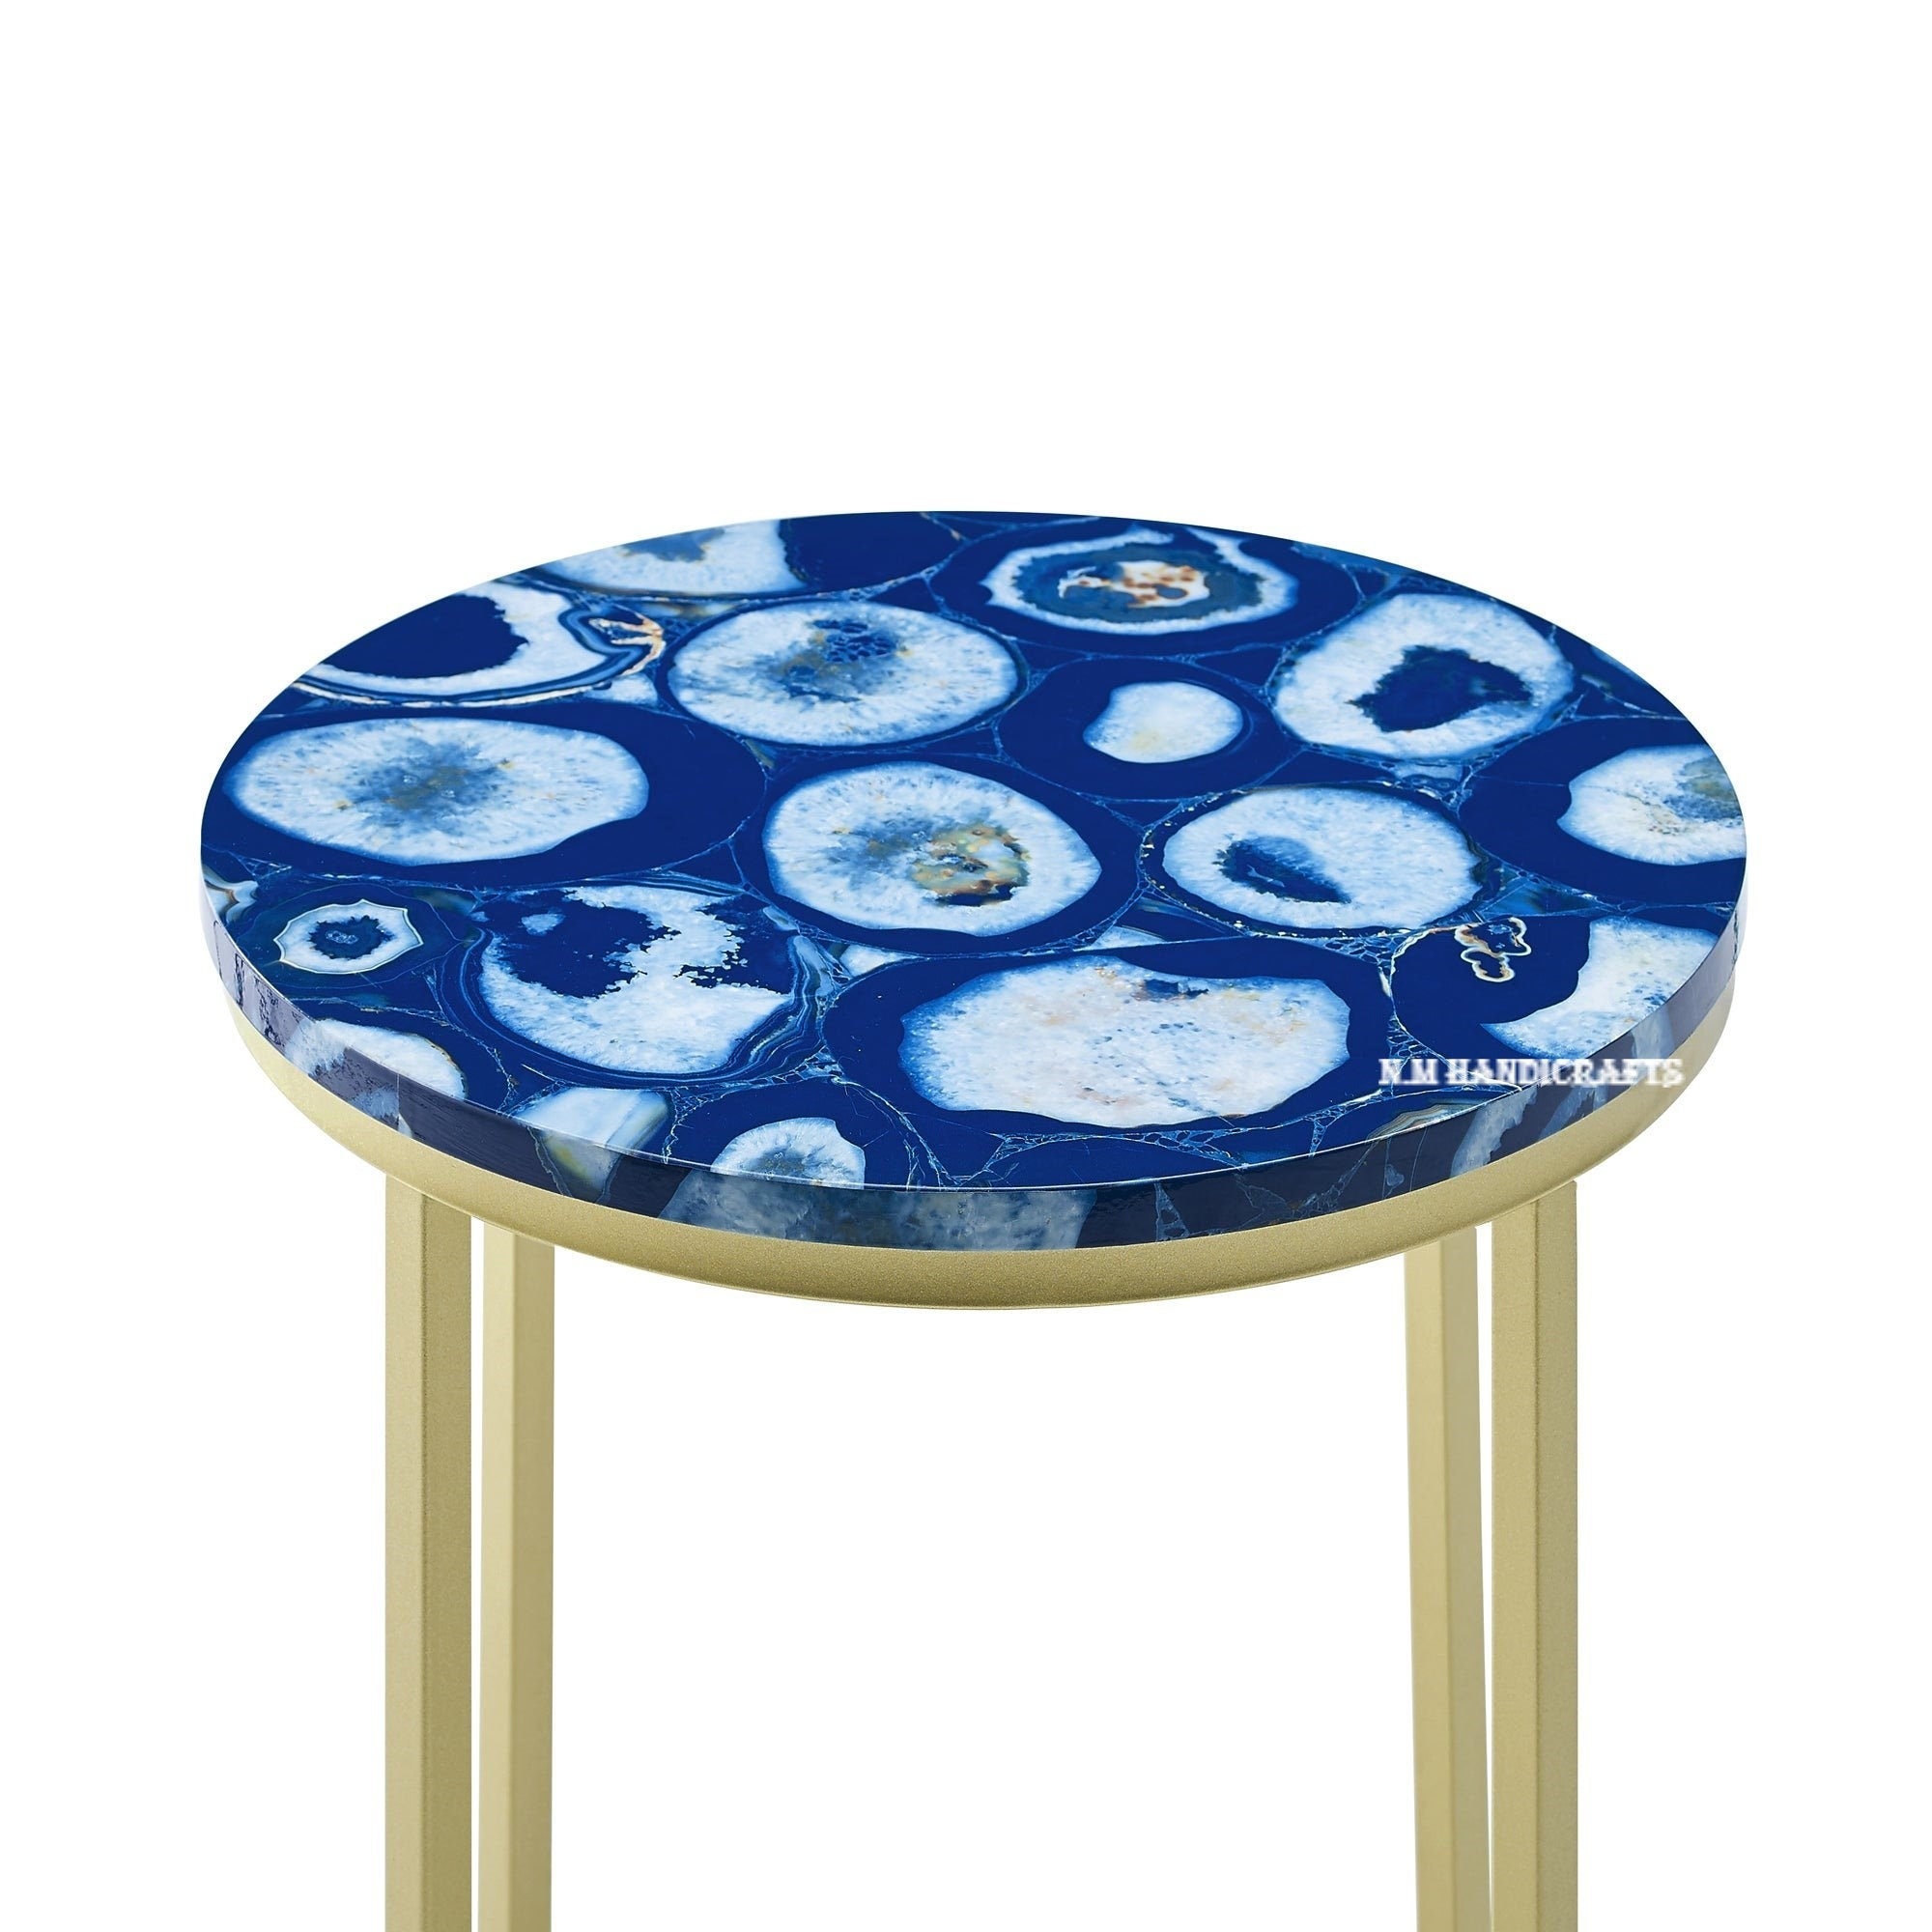 Blue Agate Table Top, Coffee & End Table, Side Table, Office Table, Centre Table, Patio Table, Agate Stones Marquetry, Home And Office Decor